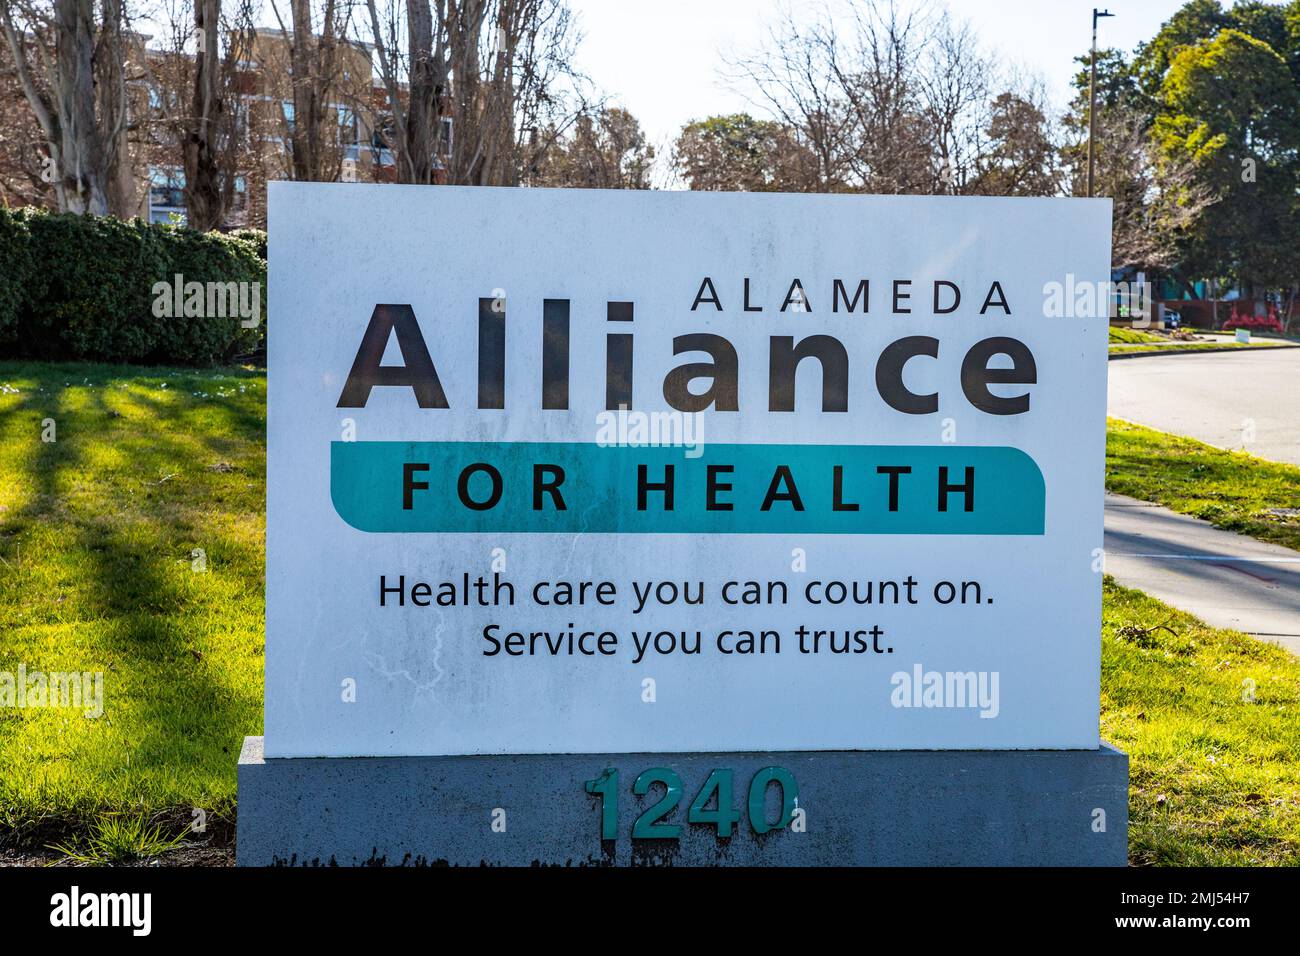 Alameda Alliance for Health in Alameda California USA, A health plan for low income individuals. Stock Photo